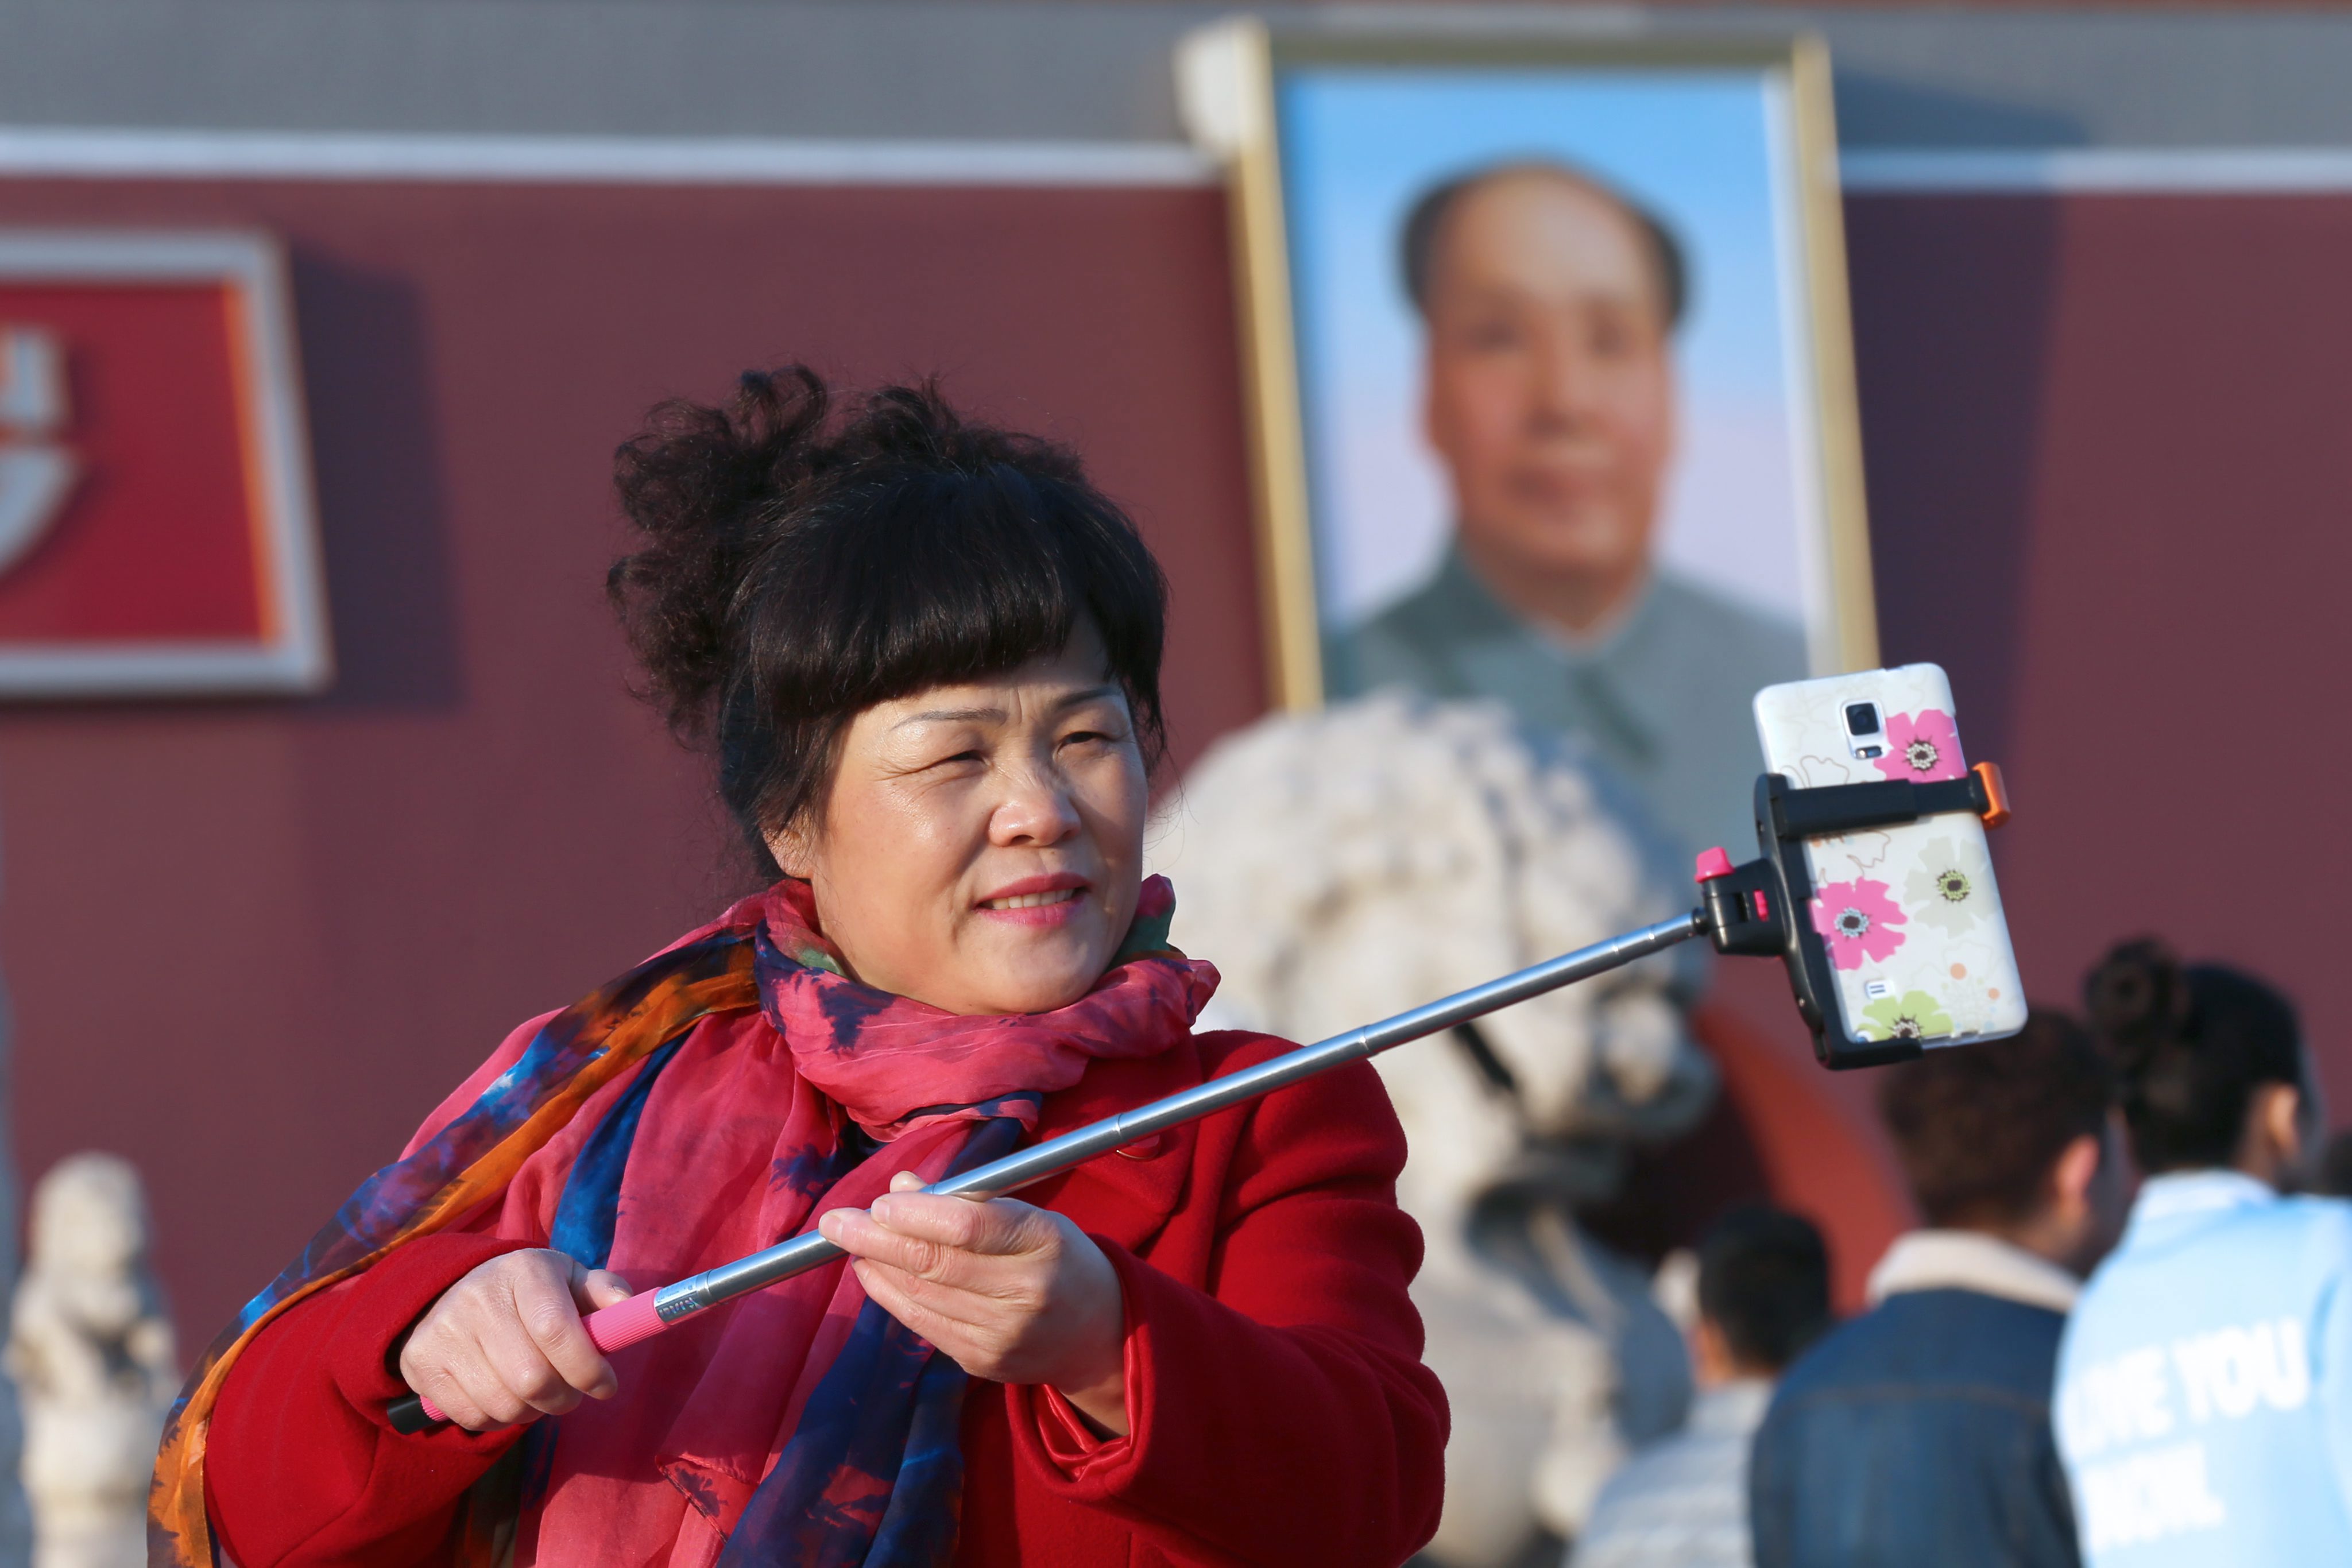 A Chinese woman uses a selfie stick to snap a picture of herself near the portrait of Mao Zedong in Beijing's Tiananmen Square. Photo: EPA